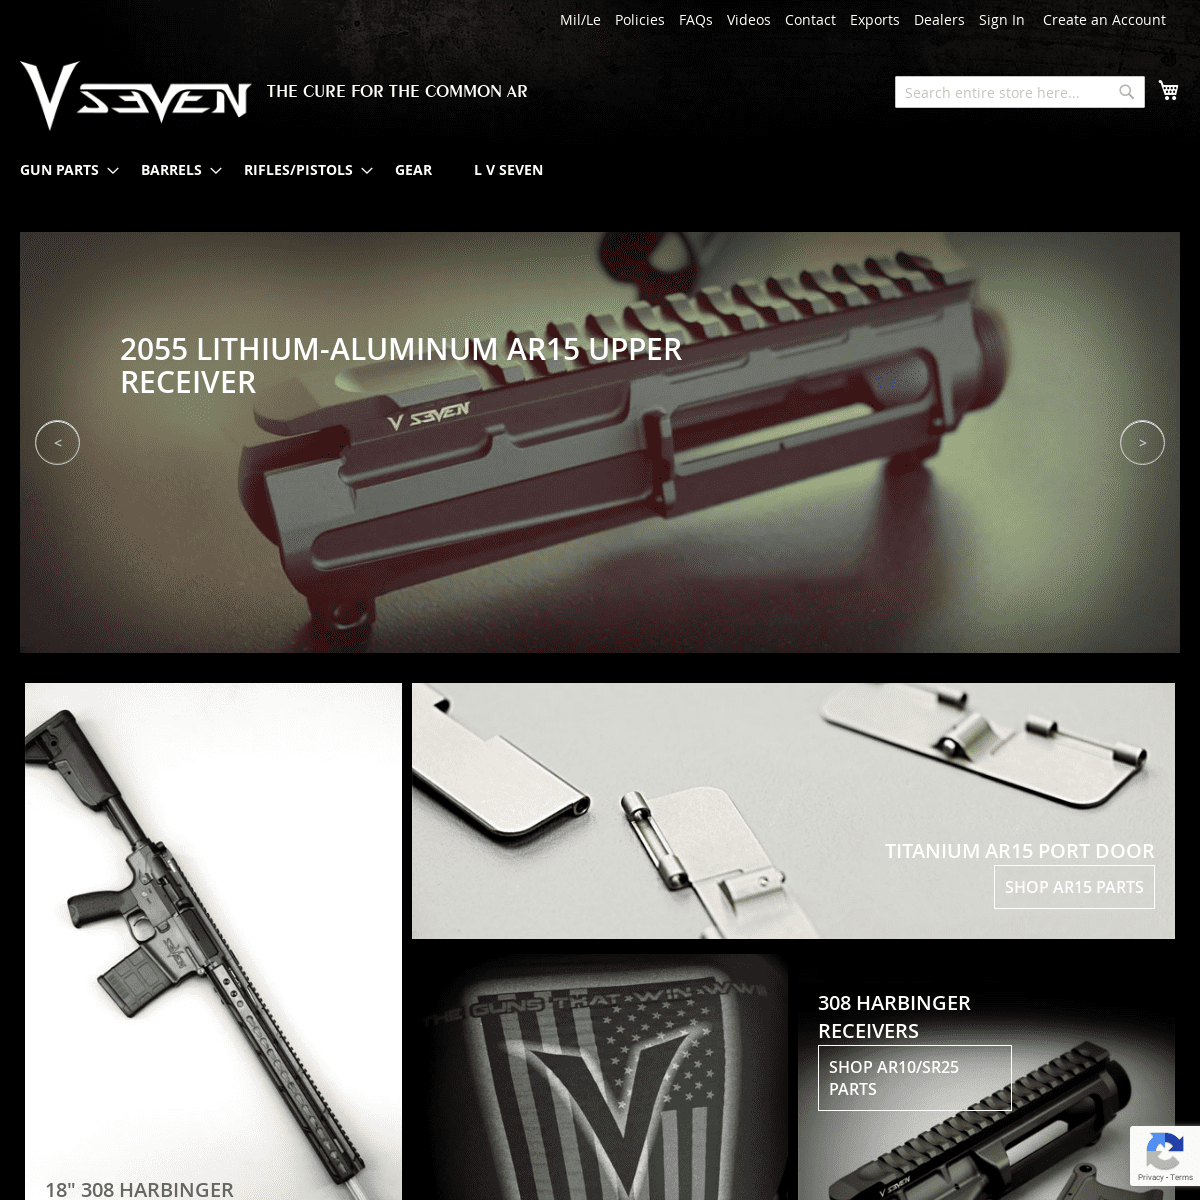 A complete backup of vsevenweaponsystems.com